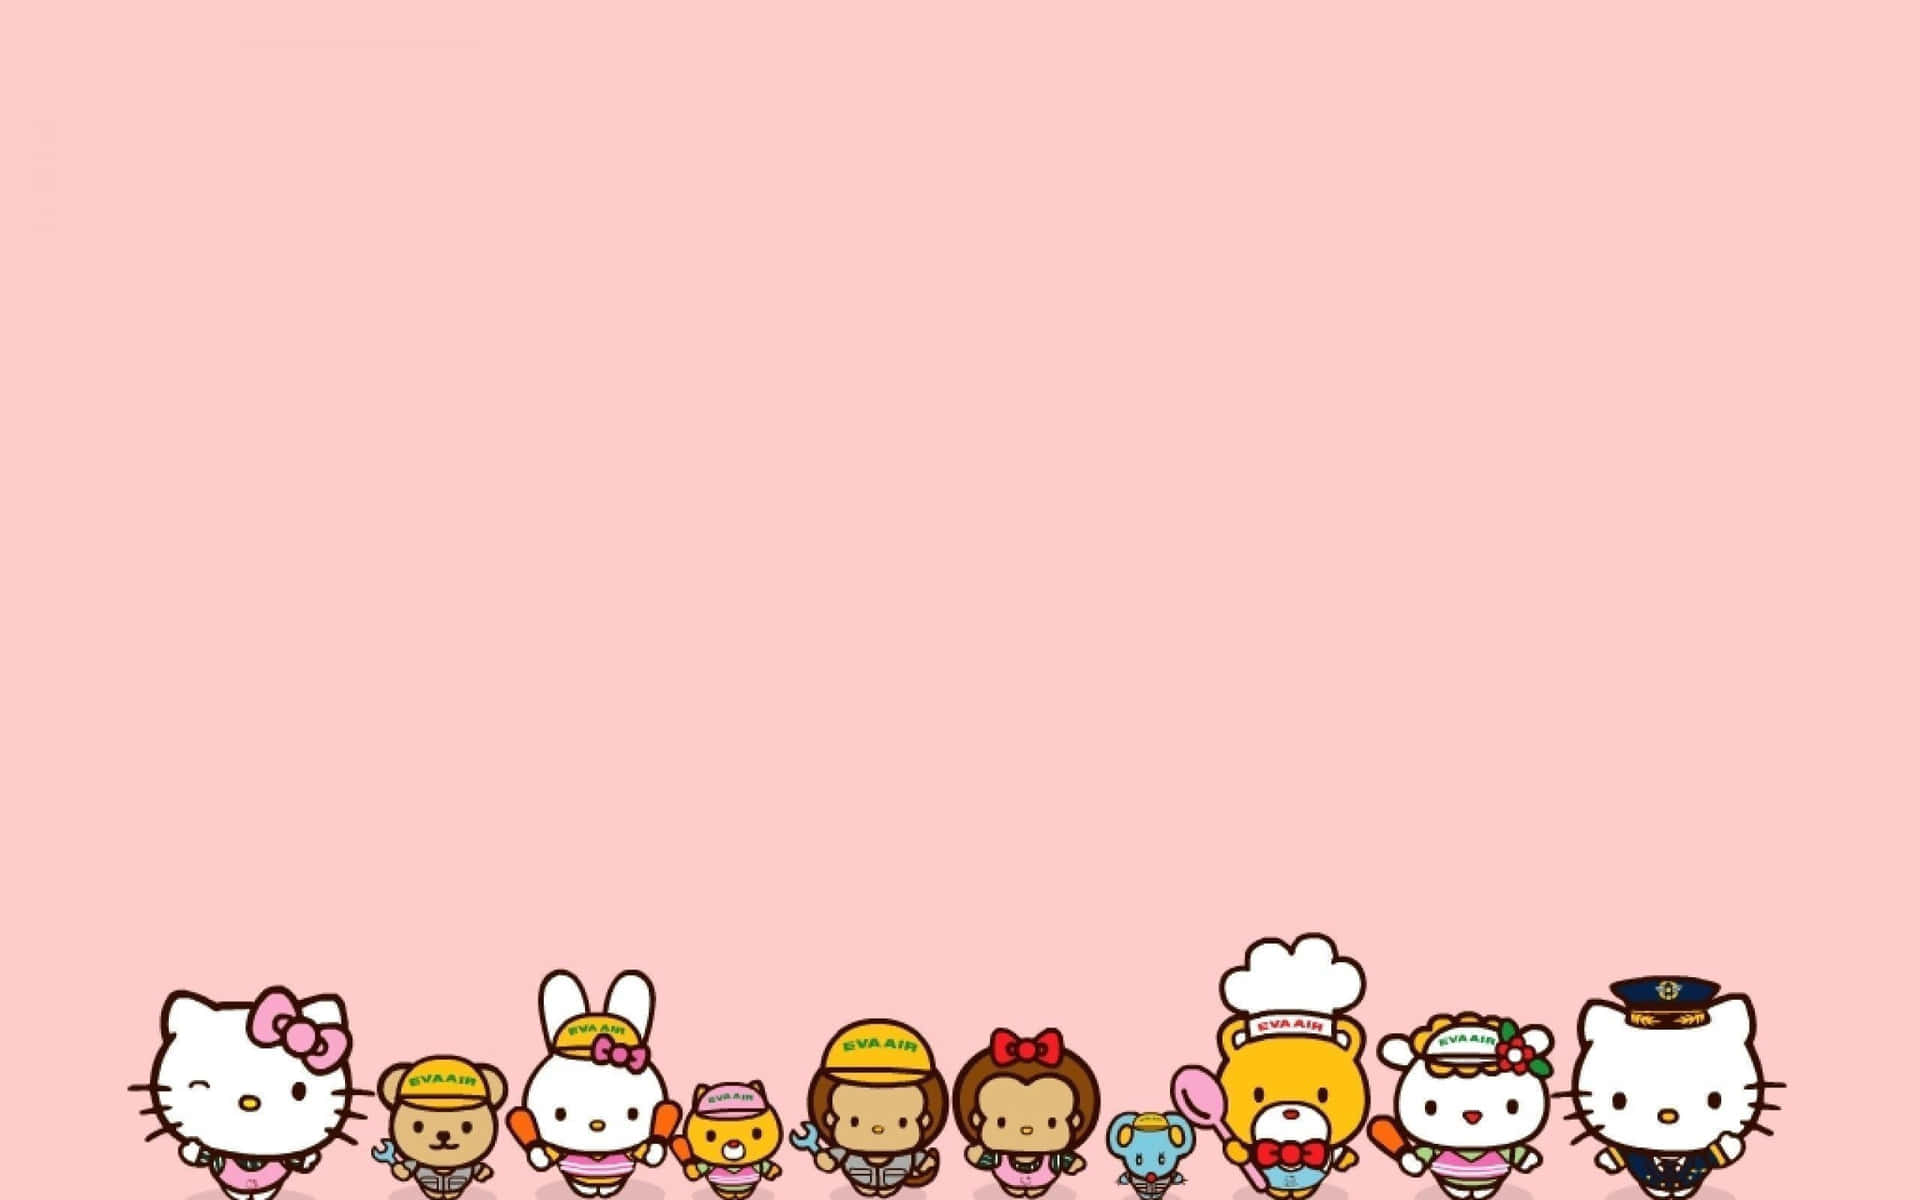 Let the world smile with Sanrio!